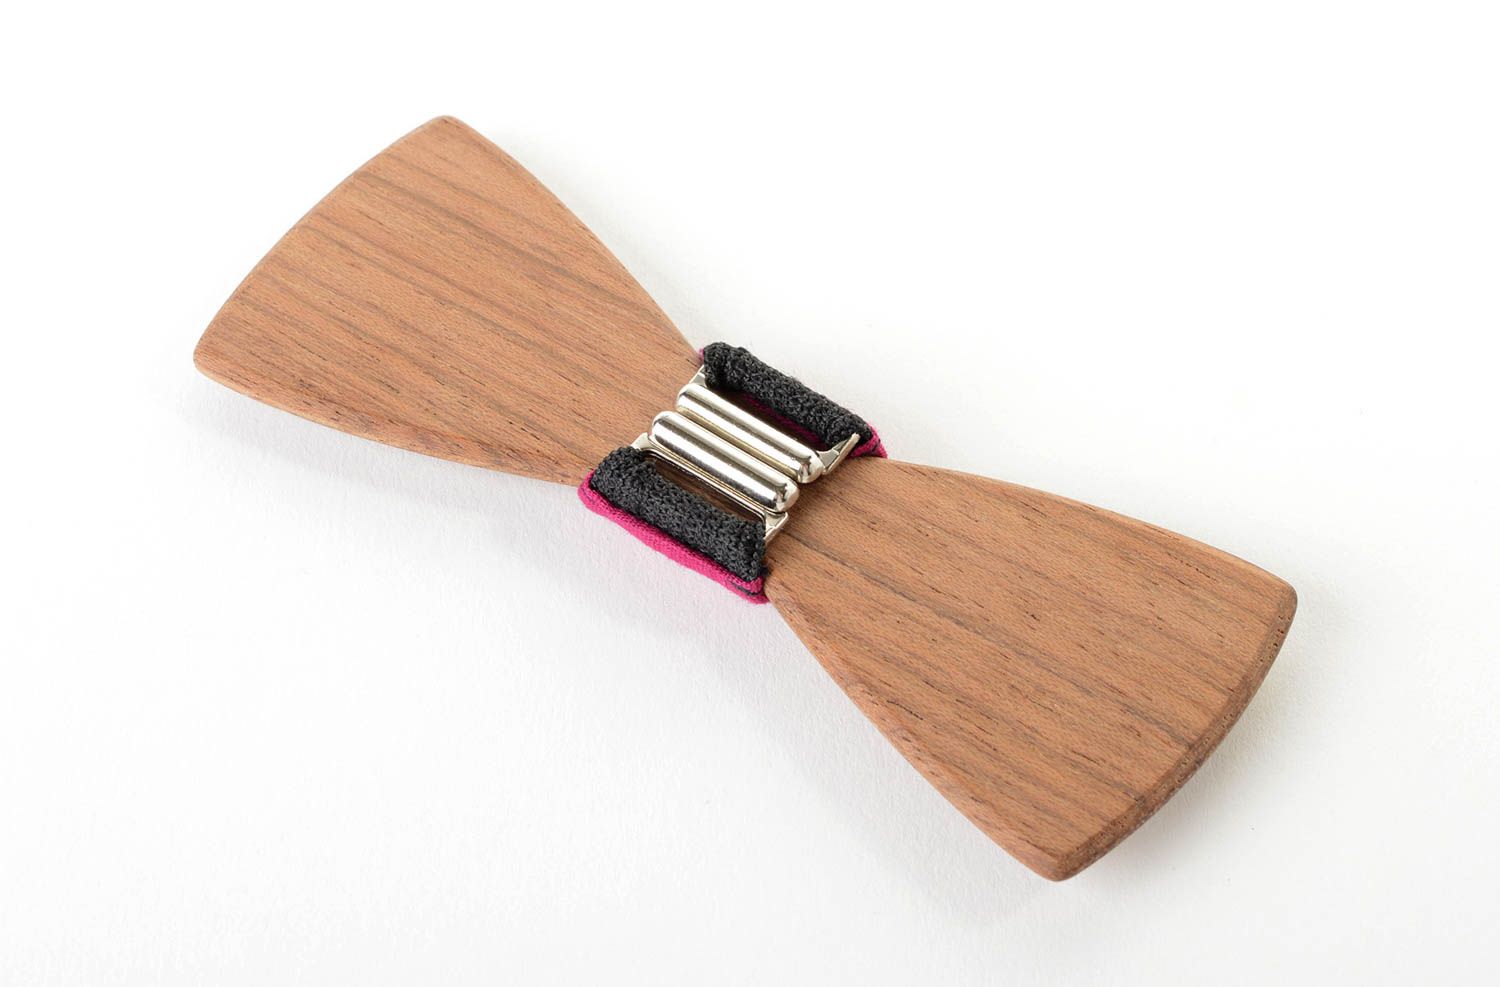 Handmade bow tie for men wood bow tie wooden bow tie accessories for men photo 3